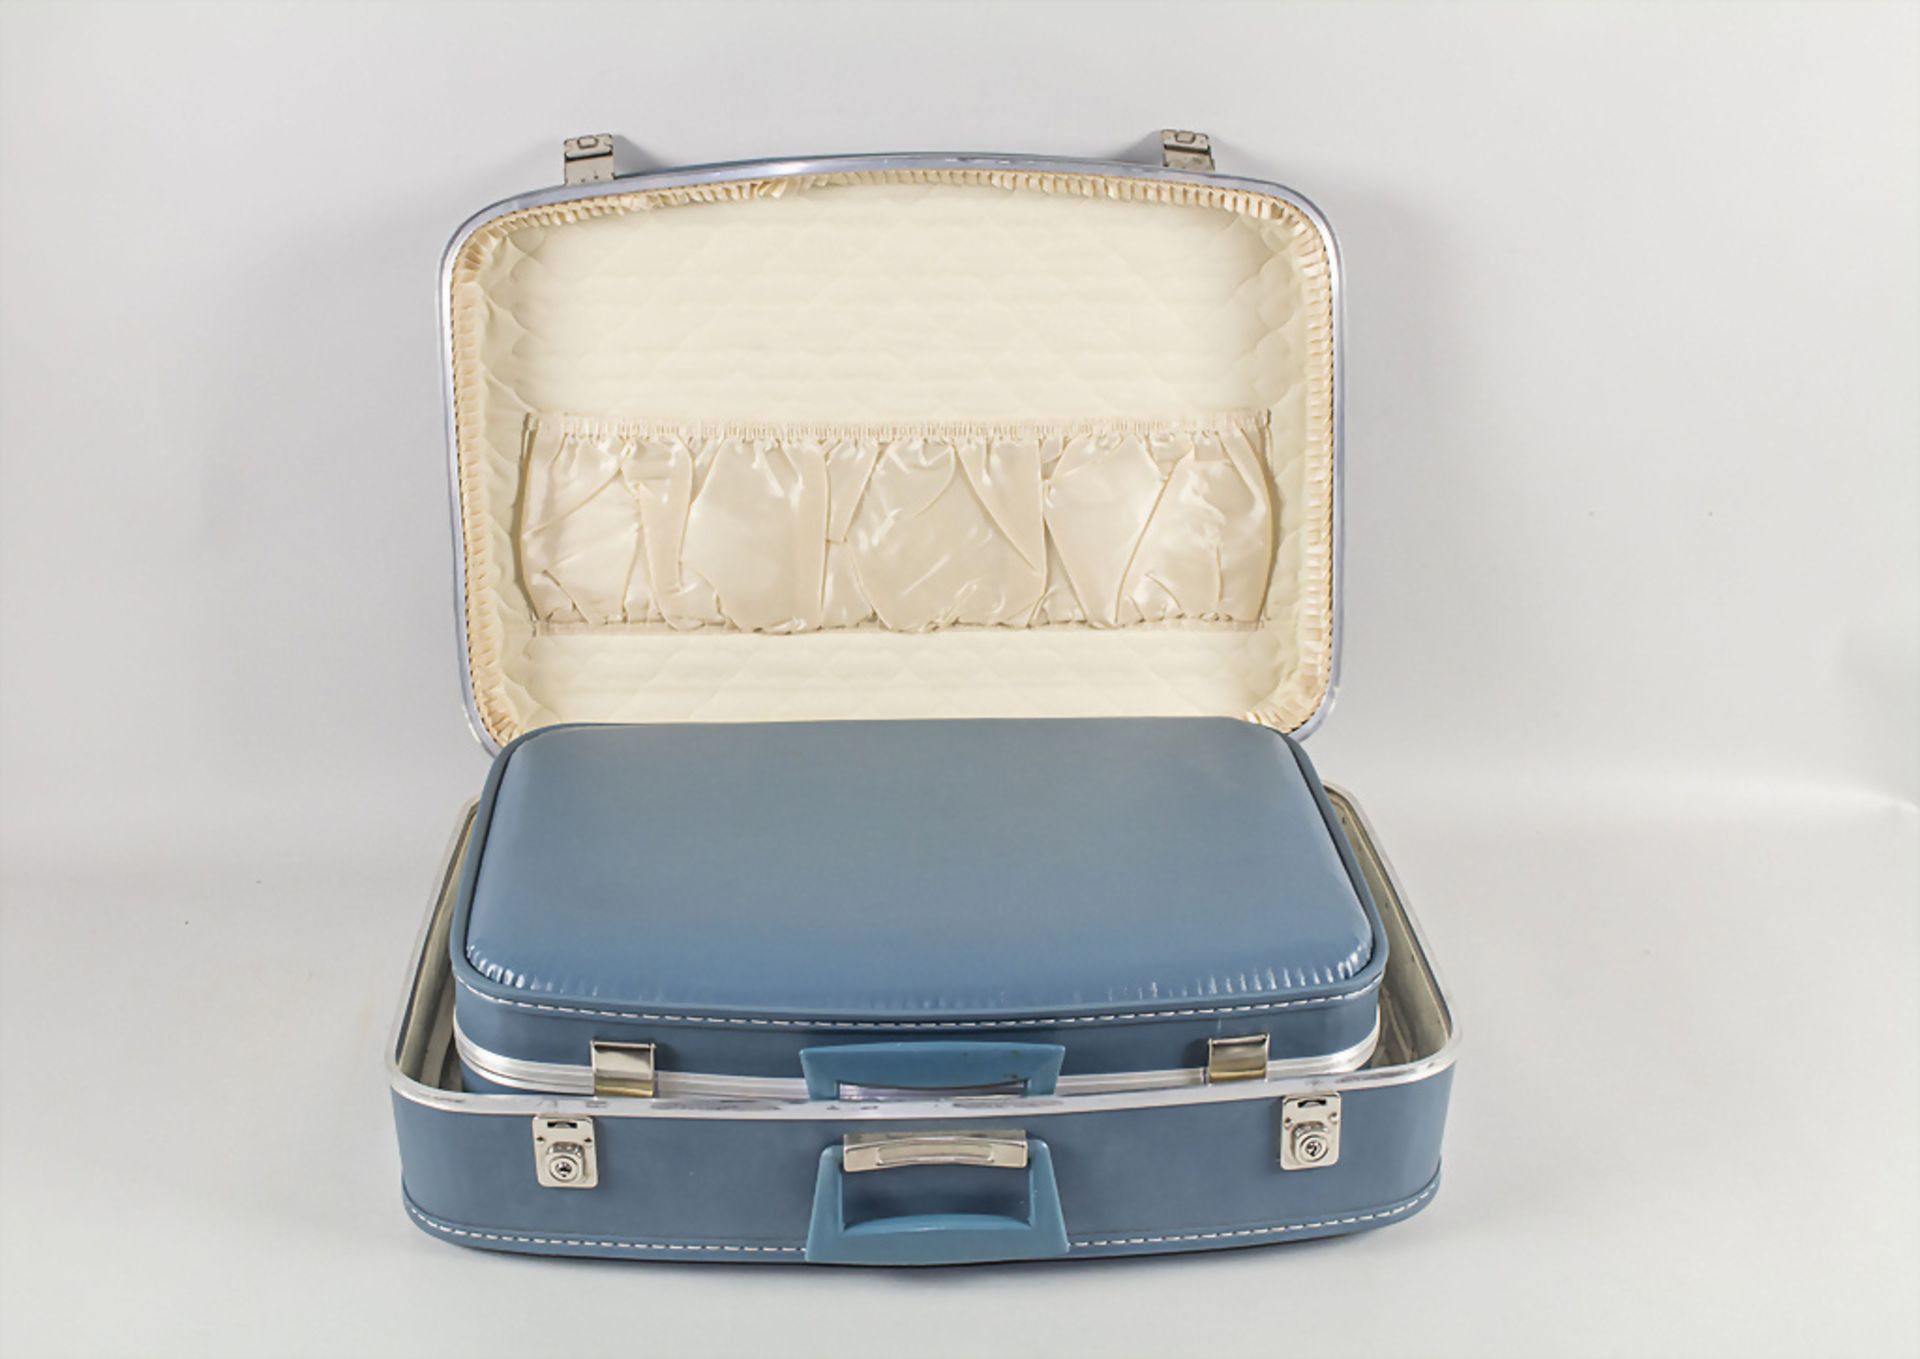 Kofferset: 4 Koffer, 1 Tasche, 1 Kulturbeutel / A suitcase set: 4 suitcases, 1 small bag, 1 ... - Image 5 of 11